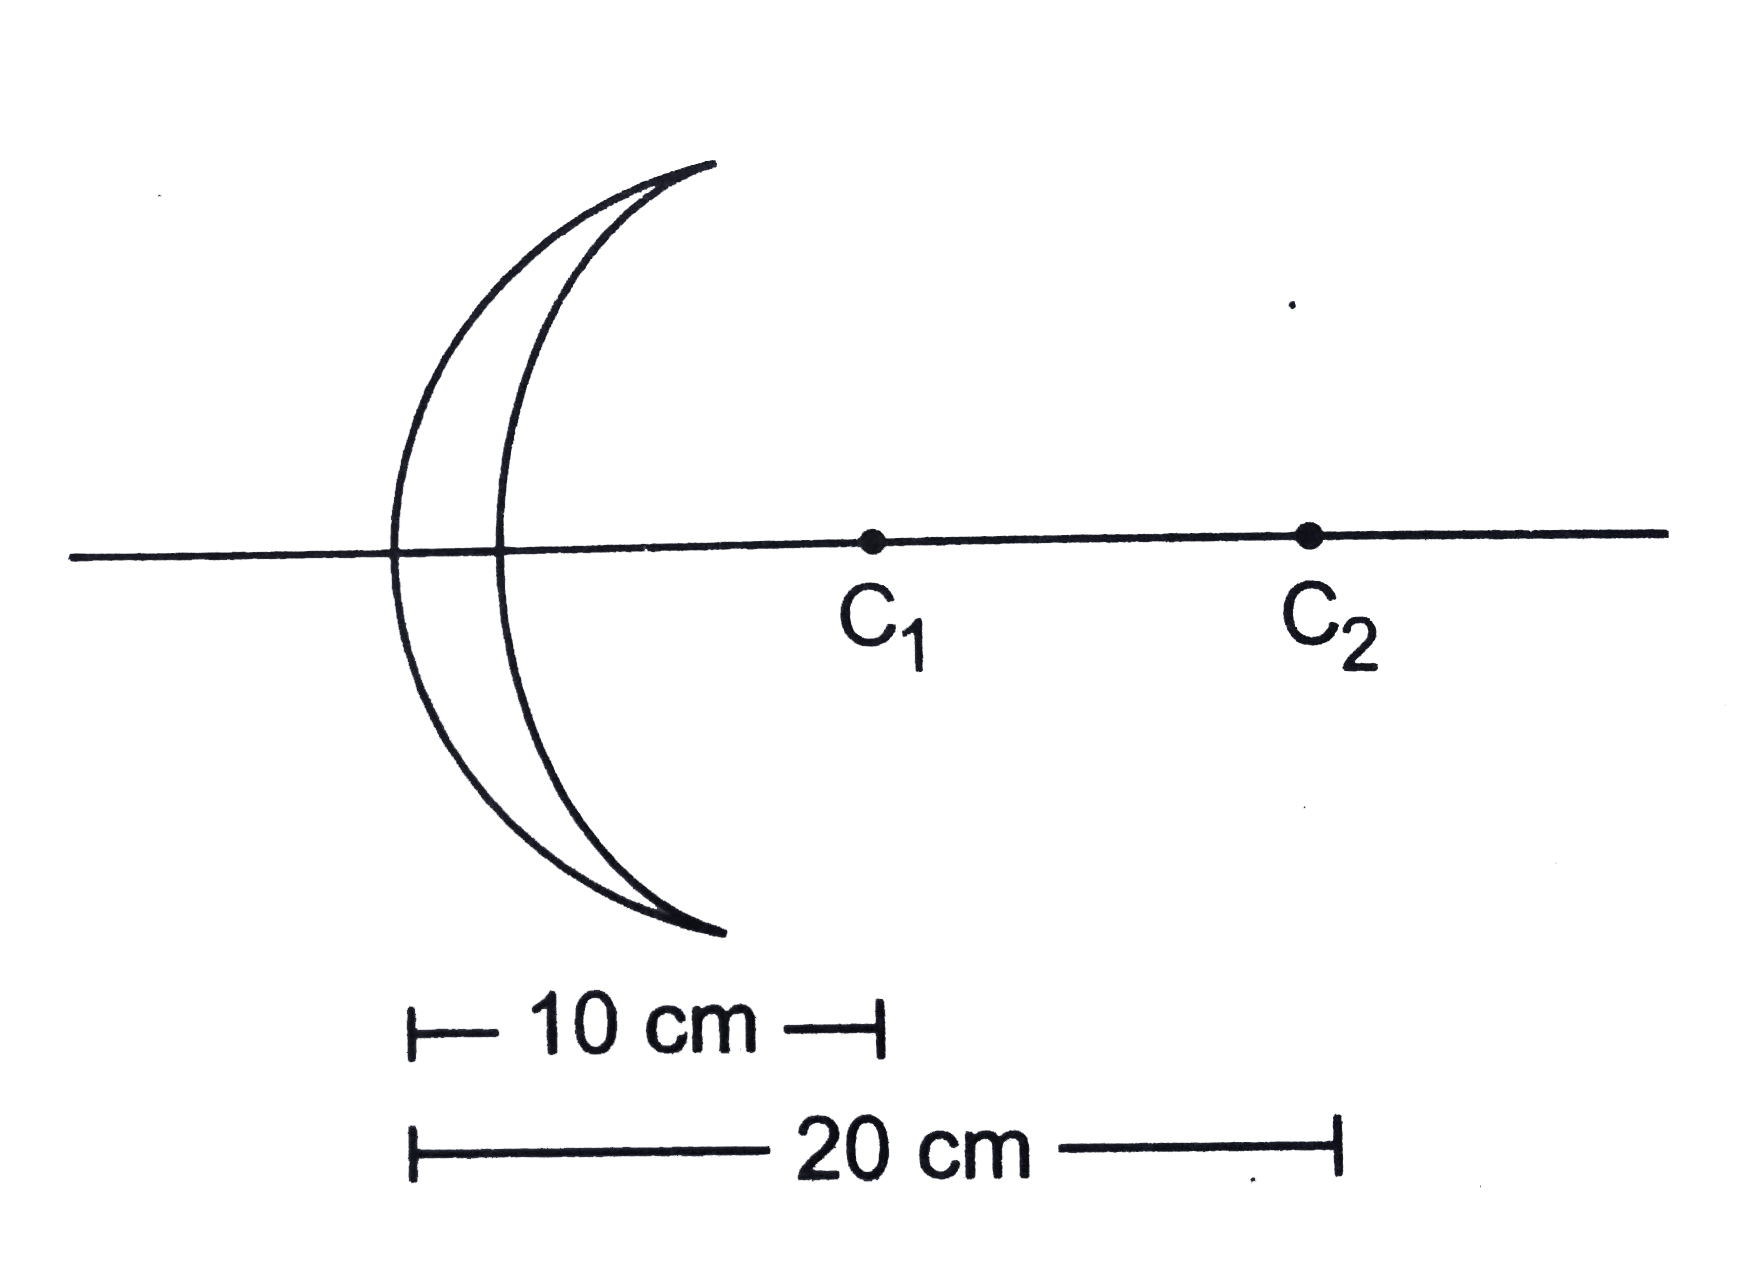 Calculate the focal length of the thin lens shown infigure. The pionts C1 and C2 denote the centres of curvature.